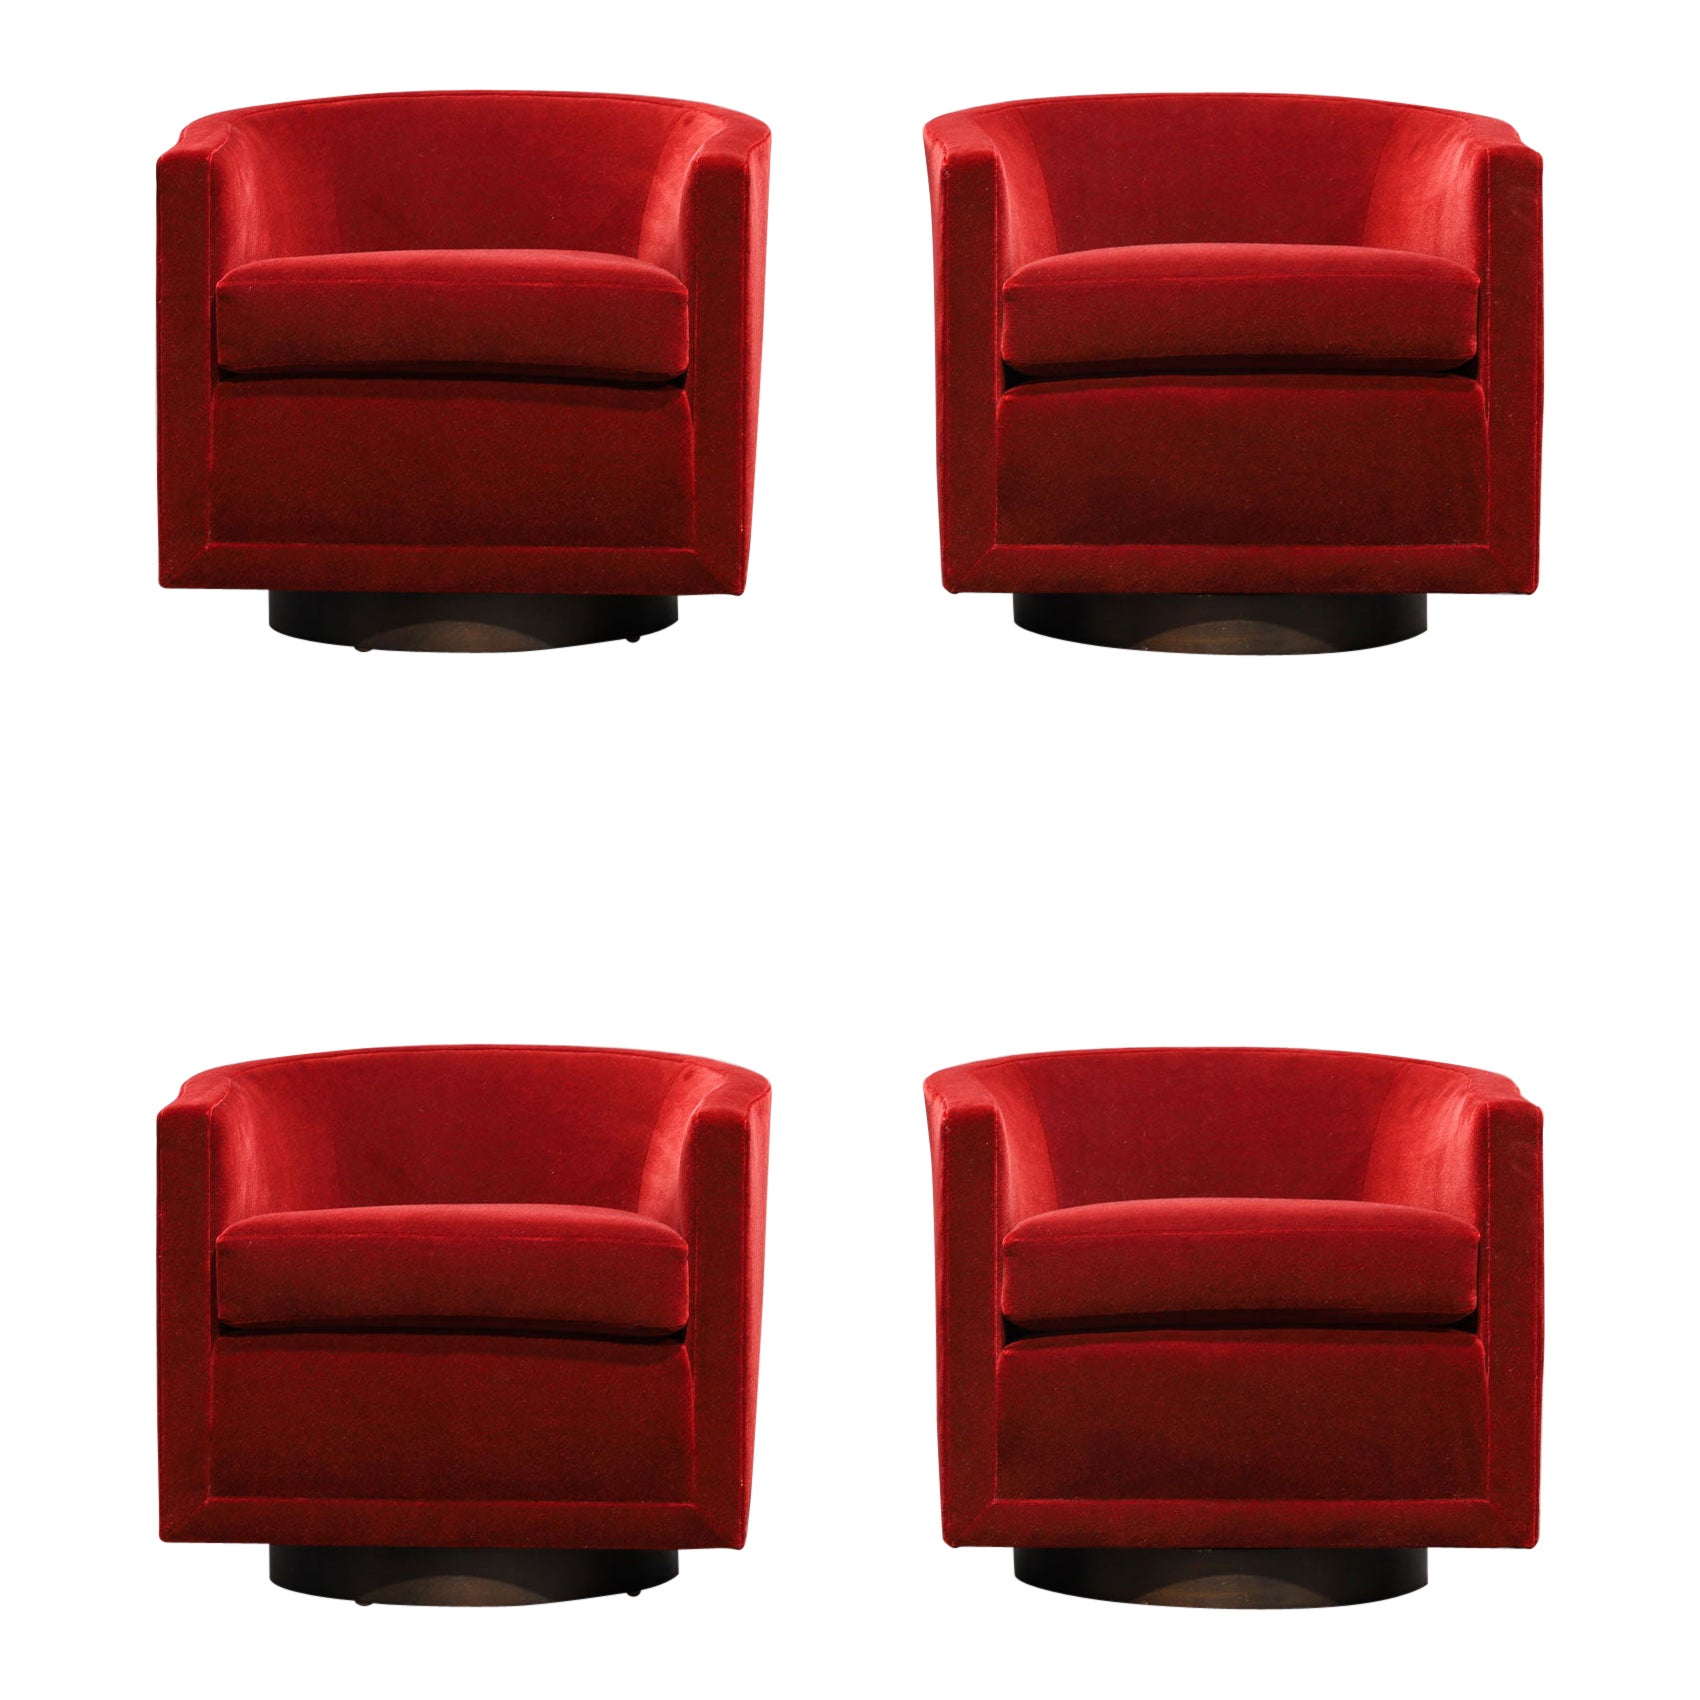 Edward Wormley for Dunbar Swivel Chairs in Claret Mohair, Set of Four